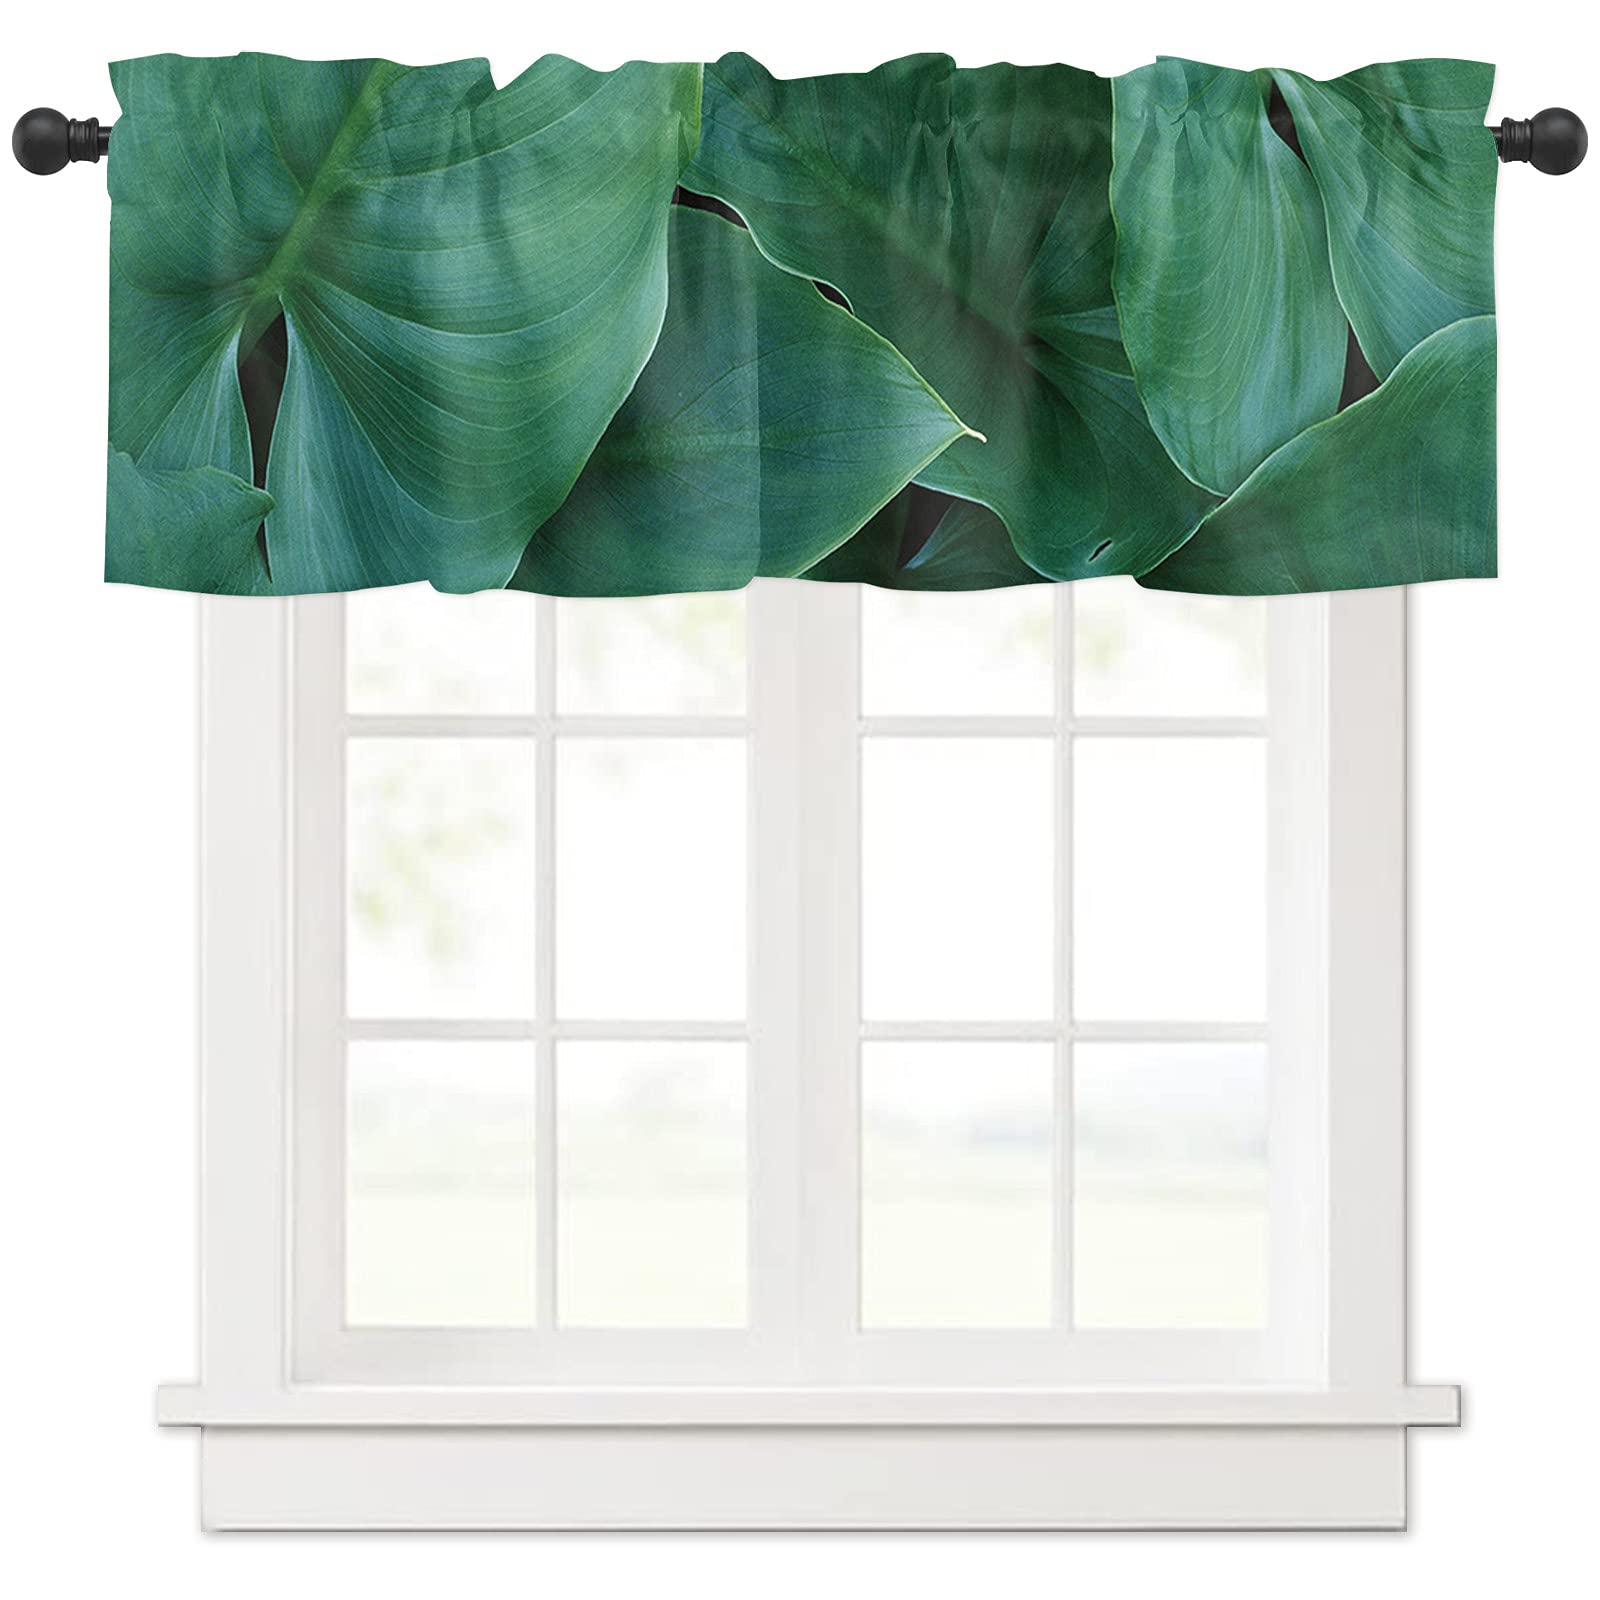 10 Incredible Green Valances For Windows For 2023 1698112133 